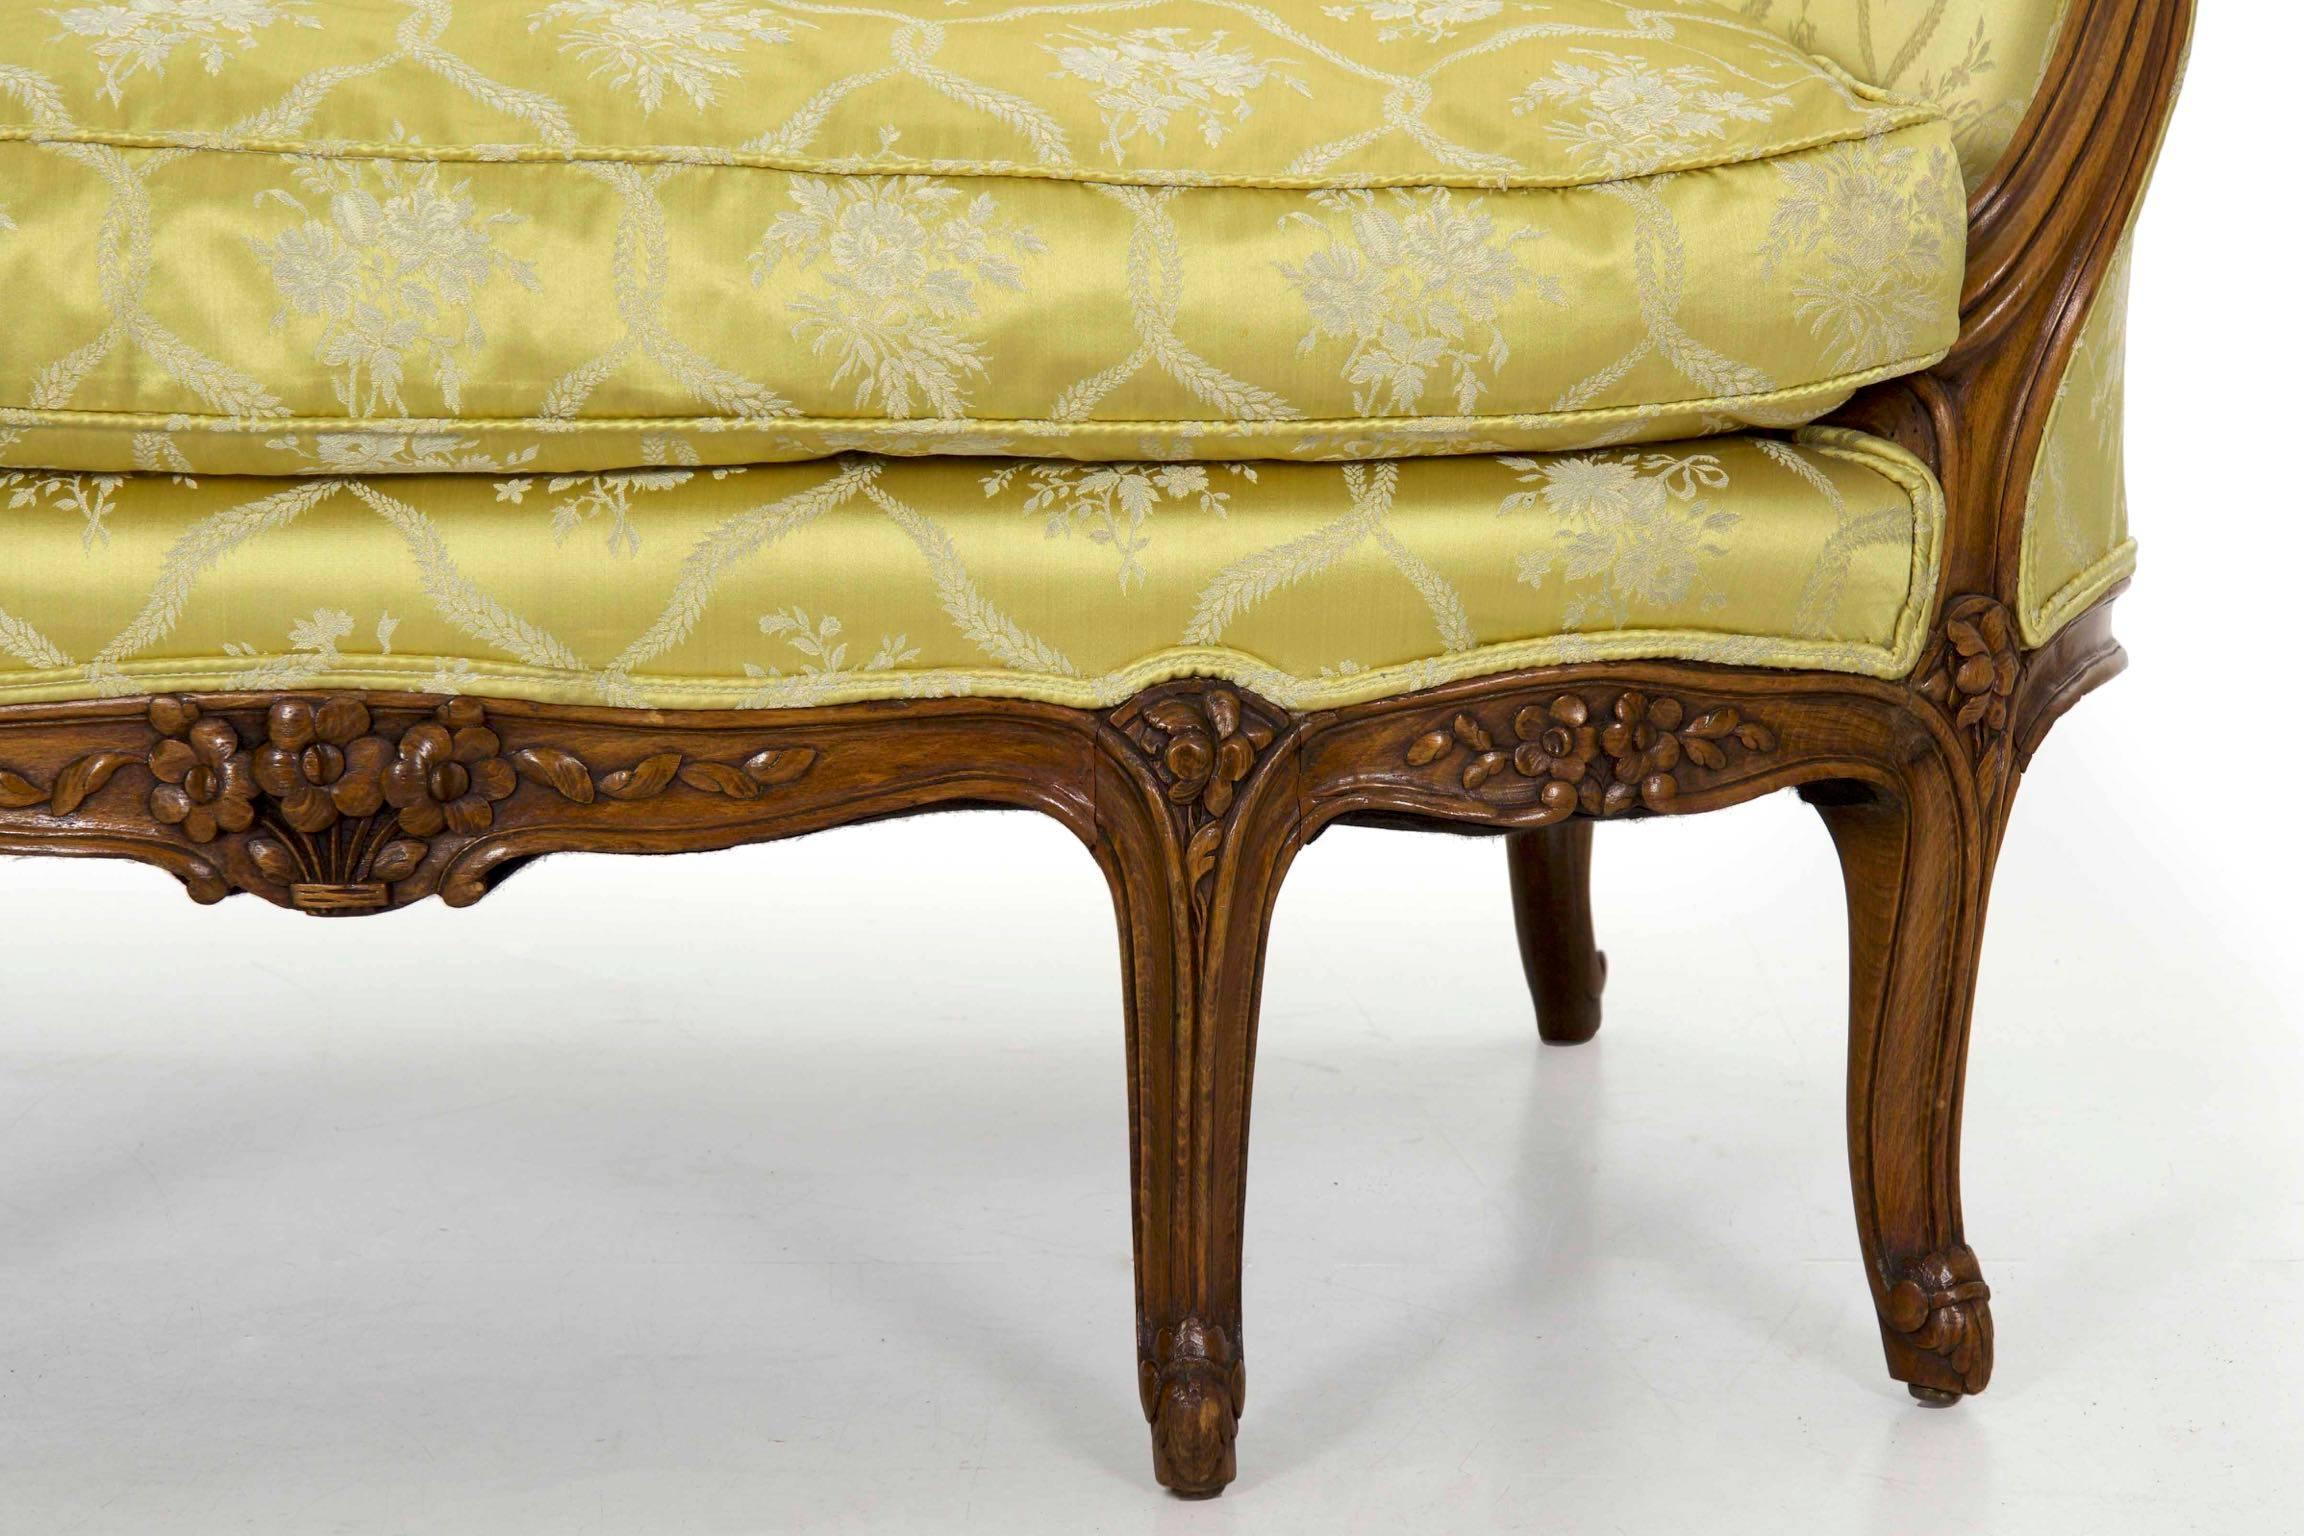 19th Century French Louis XV Style Antique Canapé Sofa Settee 2